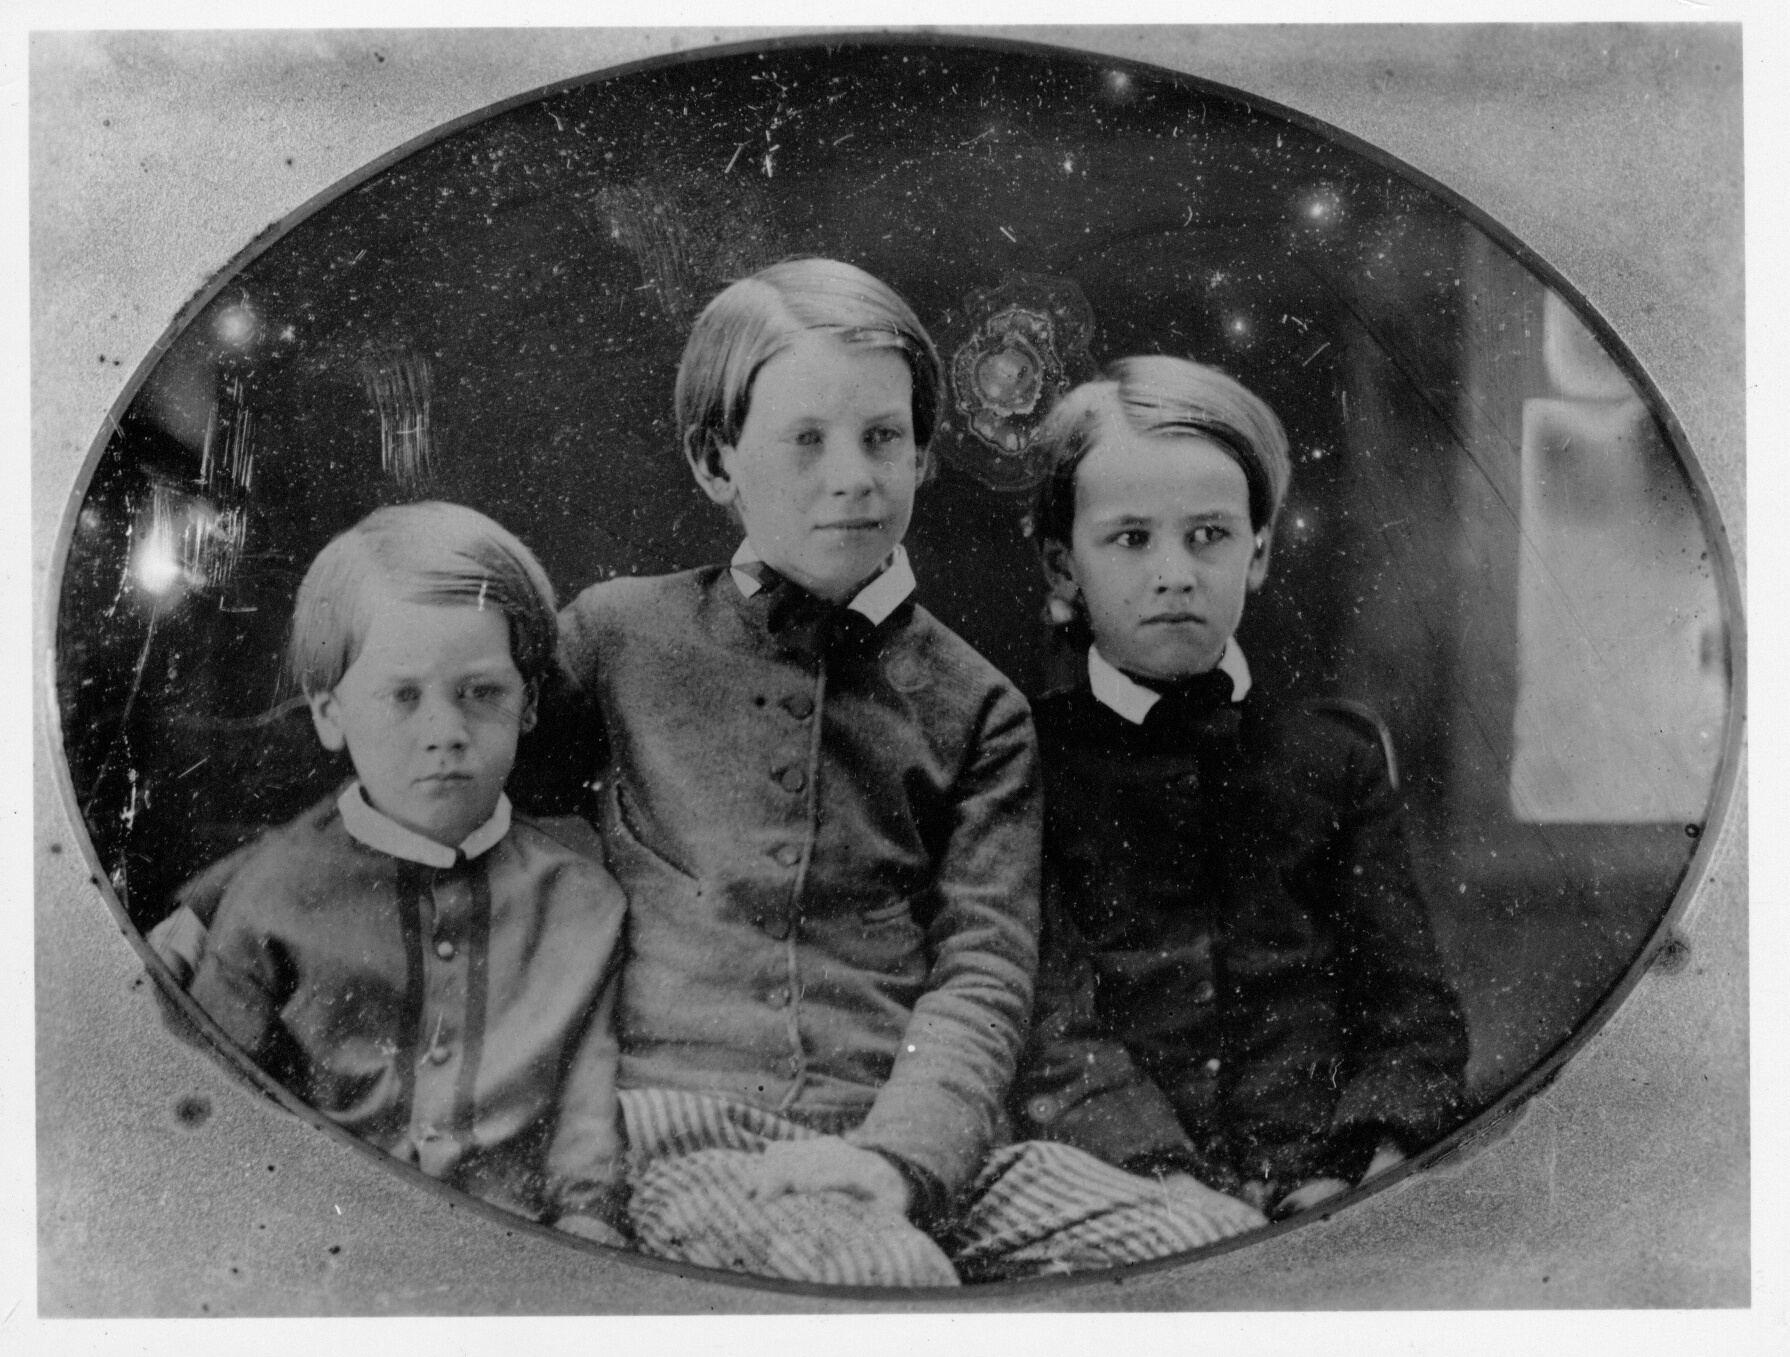 A black and white photograph. The sons of Horace and Mary Mann, c1855. Left to Right, Benjamin Pickman Mann, Horace Mann Jr., George Combe Mann.